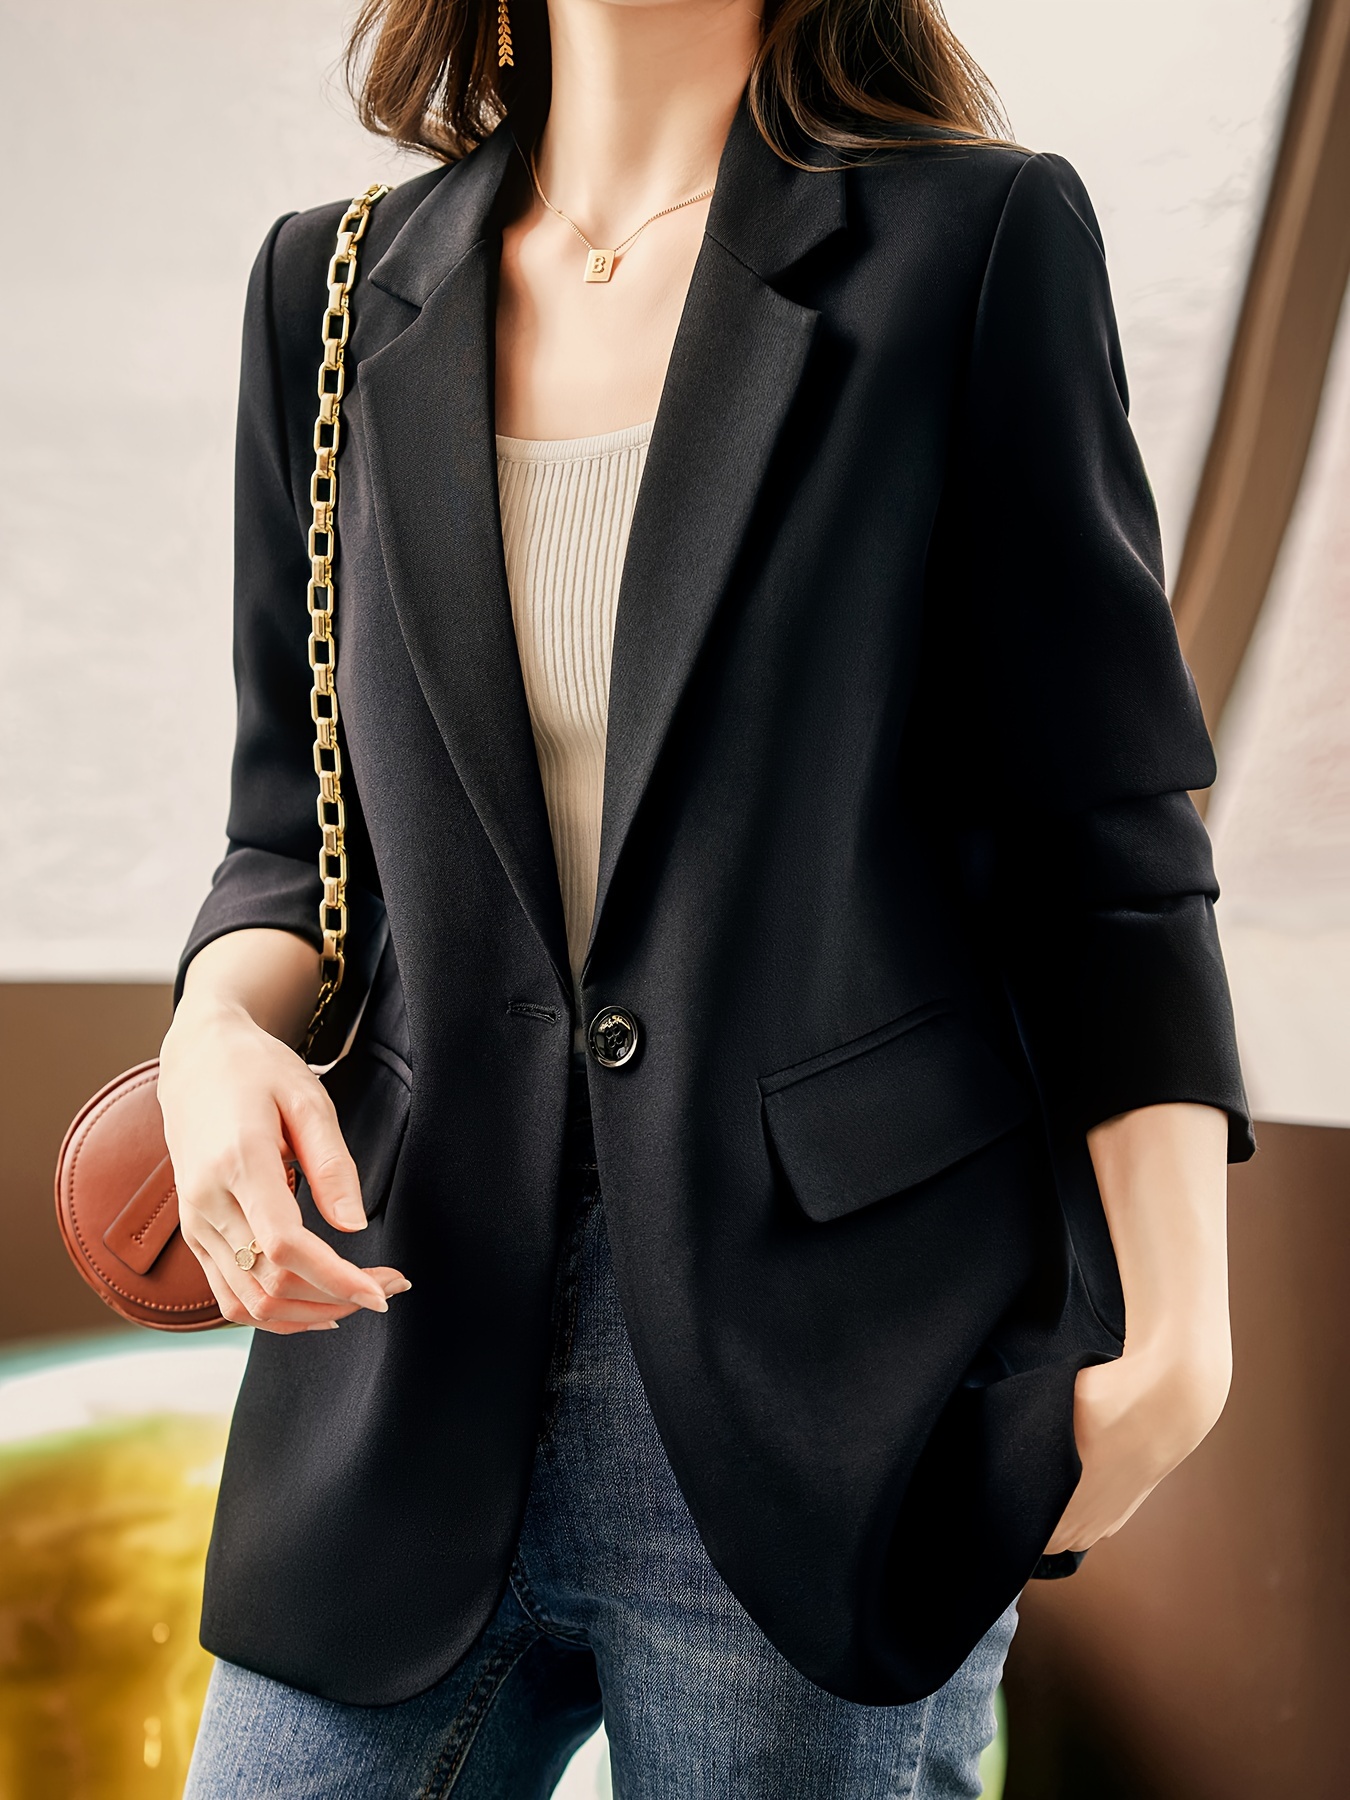 Notched Collar Button Front Blazer, Elegant Long Sleeve Blazer For Office & Work, Women s Clothing details 10